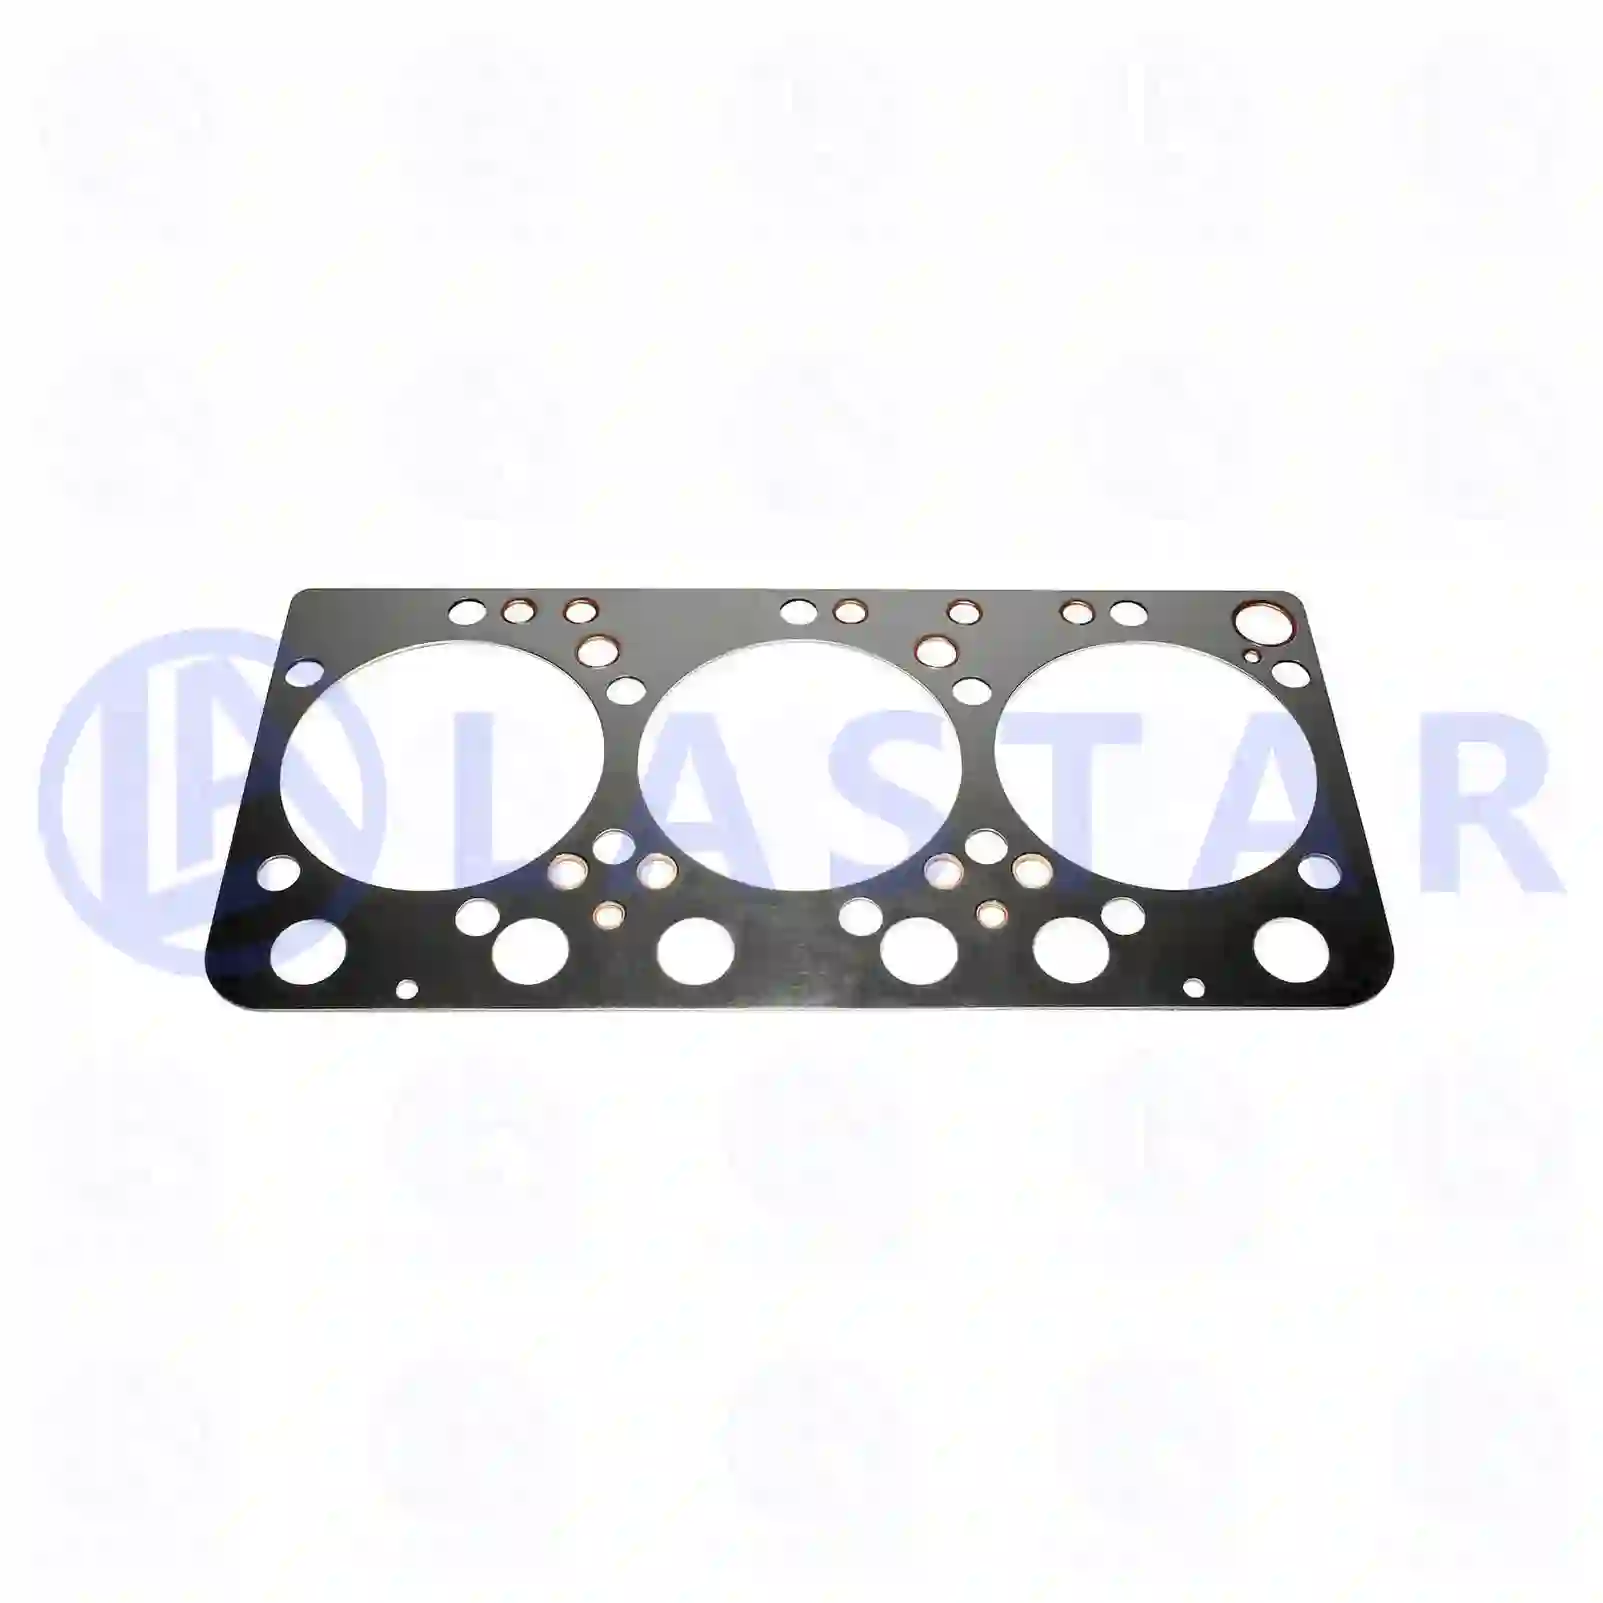  Cylinder head gasket || Lastar Spare Part | Truck Spare Parts, Auotomotive Spare Parts